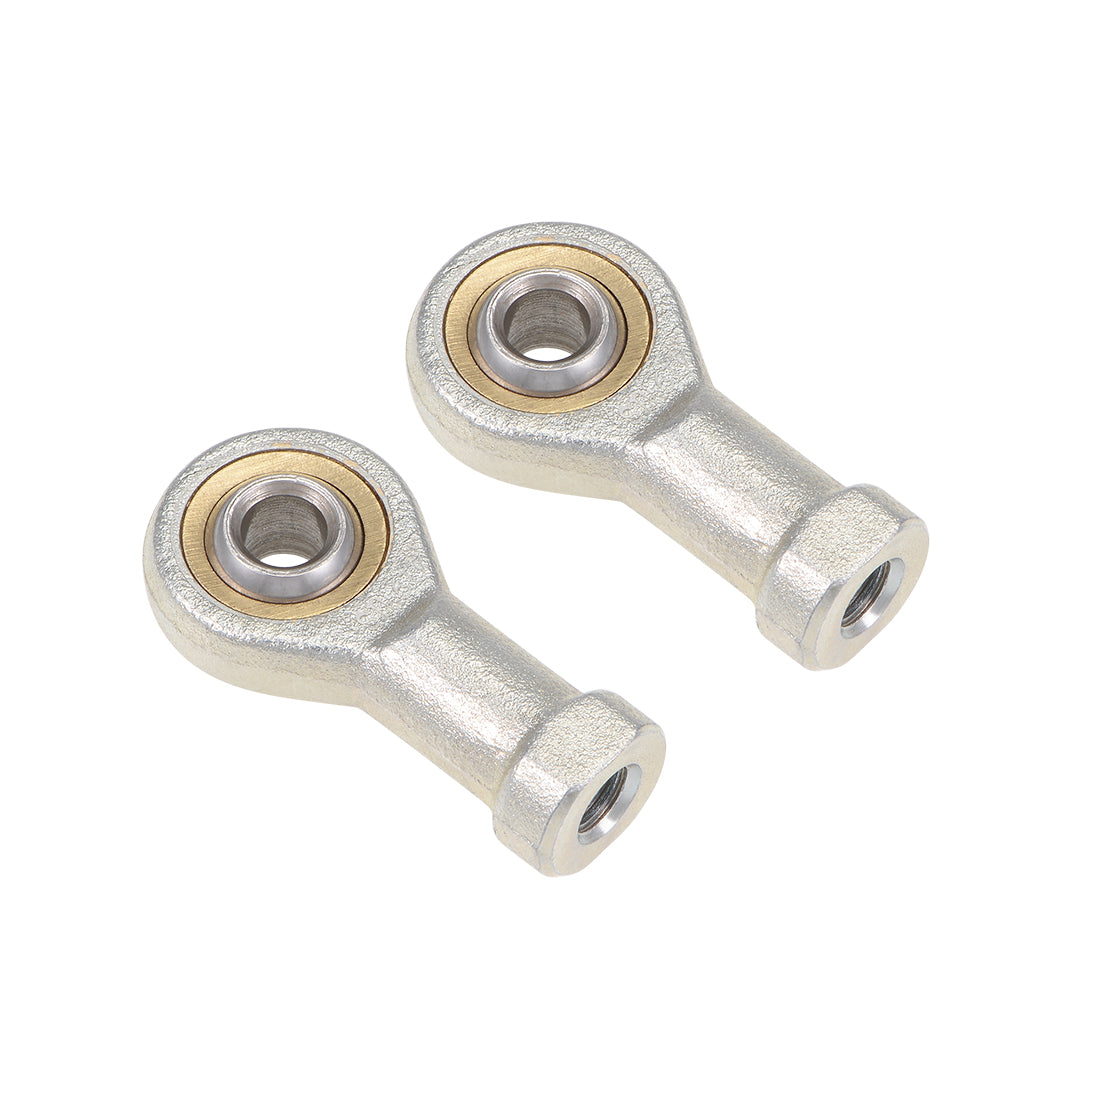 uxcell Uxcell 6mm Rod End Bearing M6x1.0mm Rod Ends Ball Joint Female Right Hand Thread 2pcs